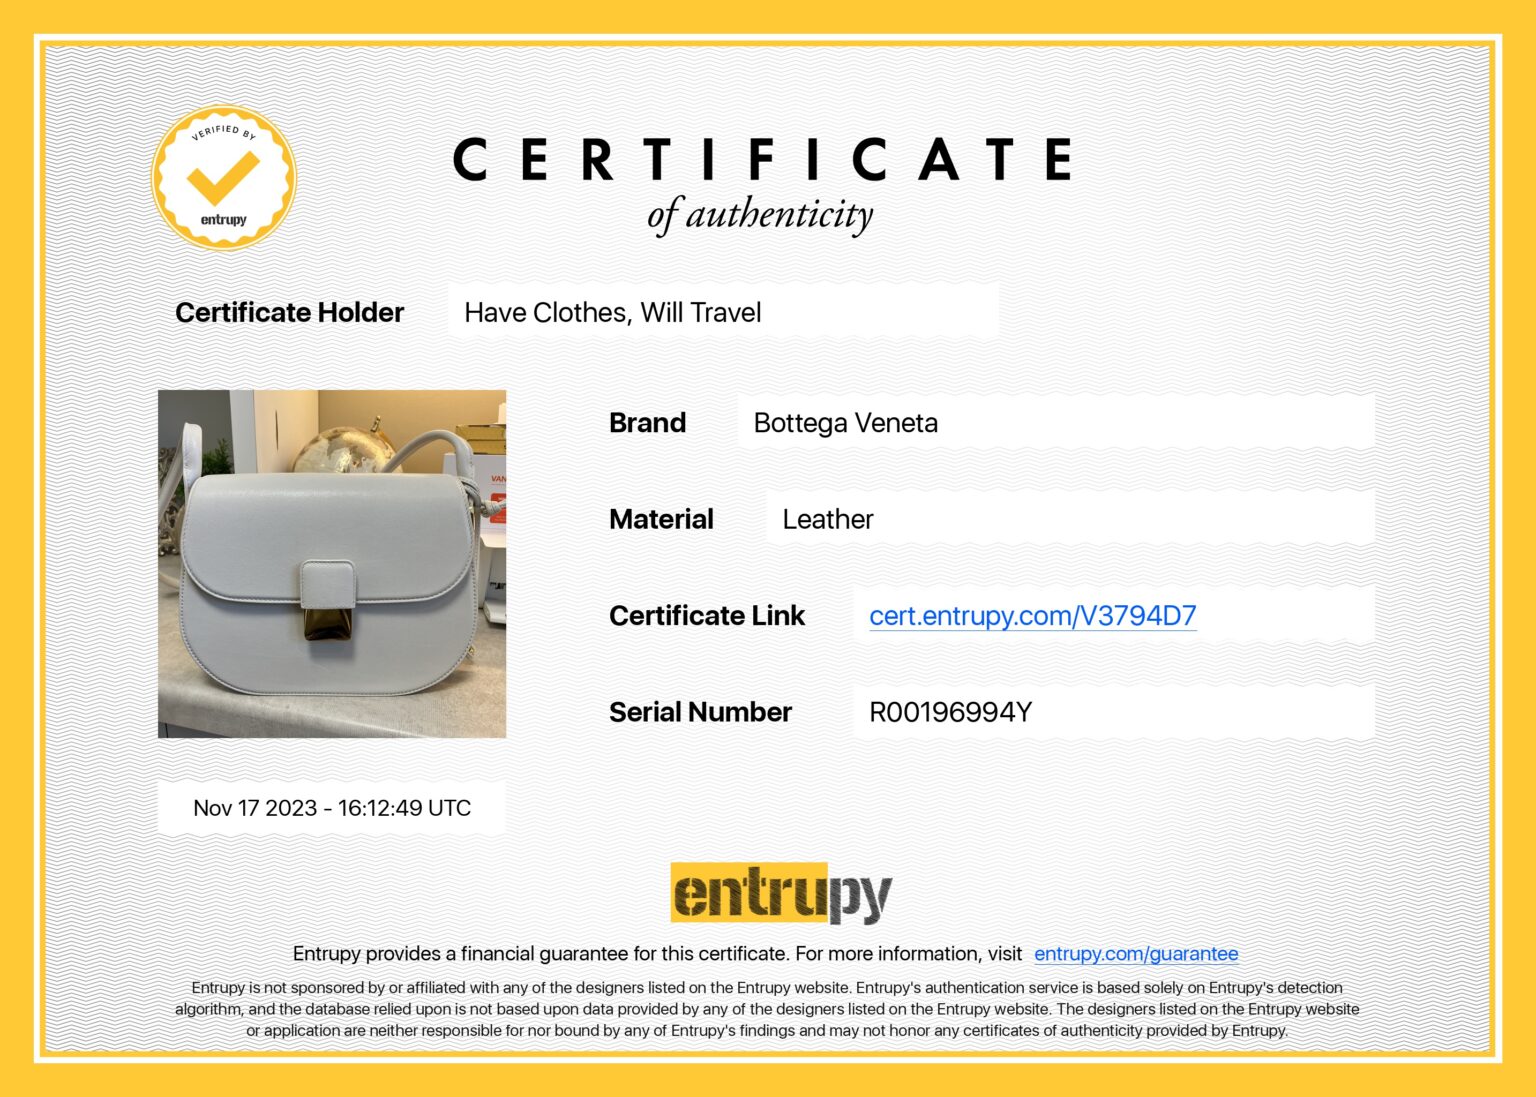 The certificate from Entrupy that certifies my bag from FWRD is authentic.